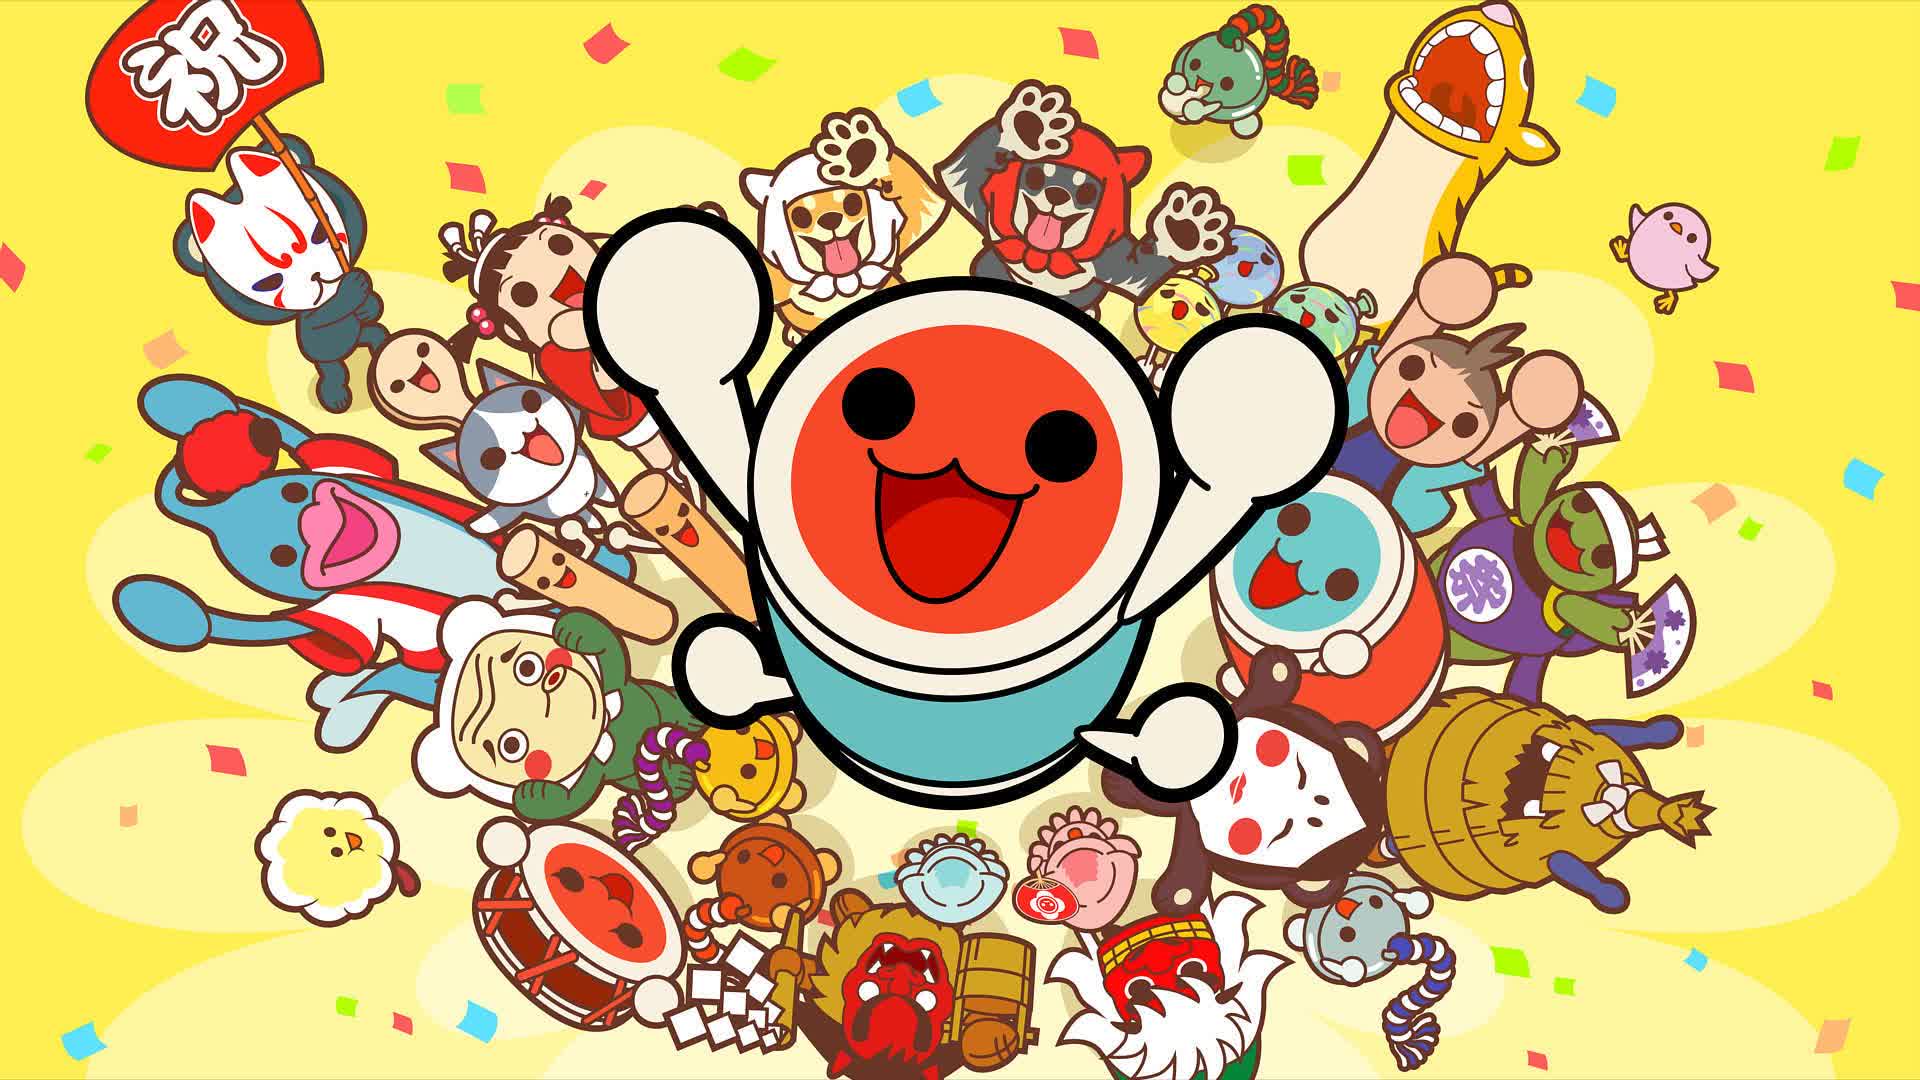 Bandai Namco announces the first-ever Xbox and PC Taiko no Tatsujin Game, which comes out in a week